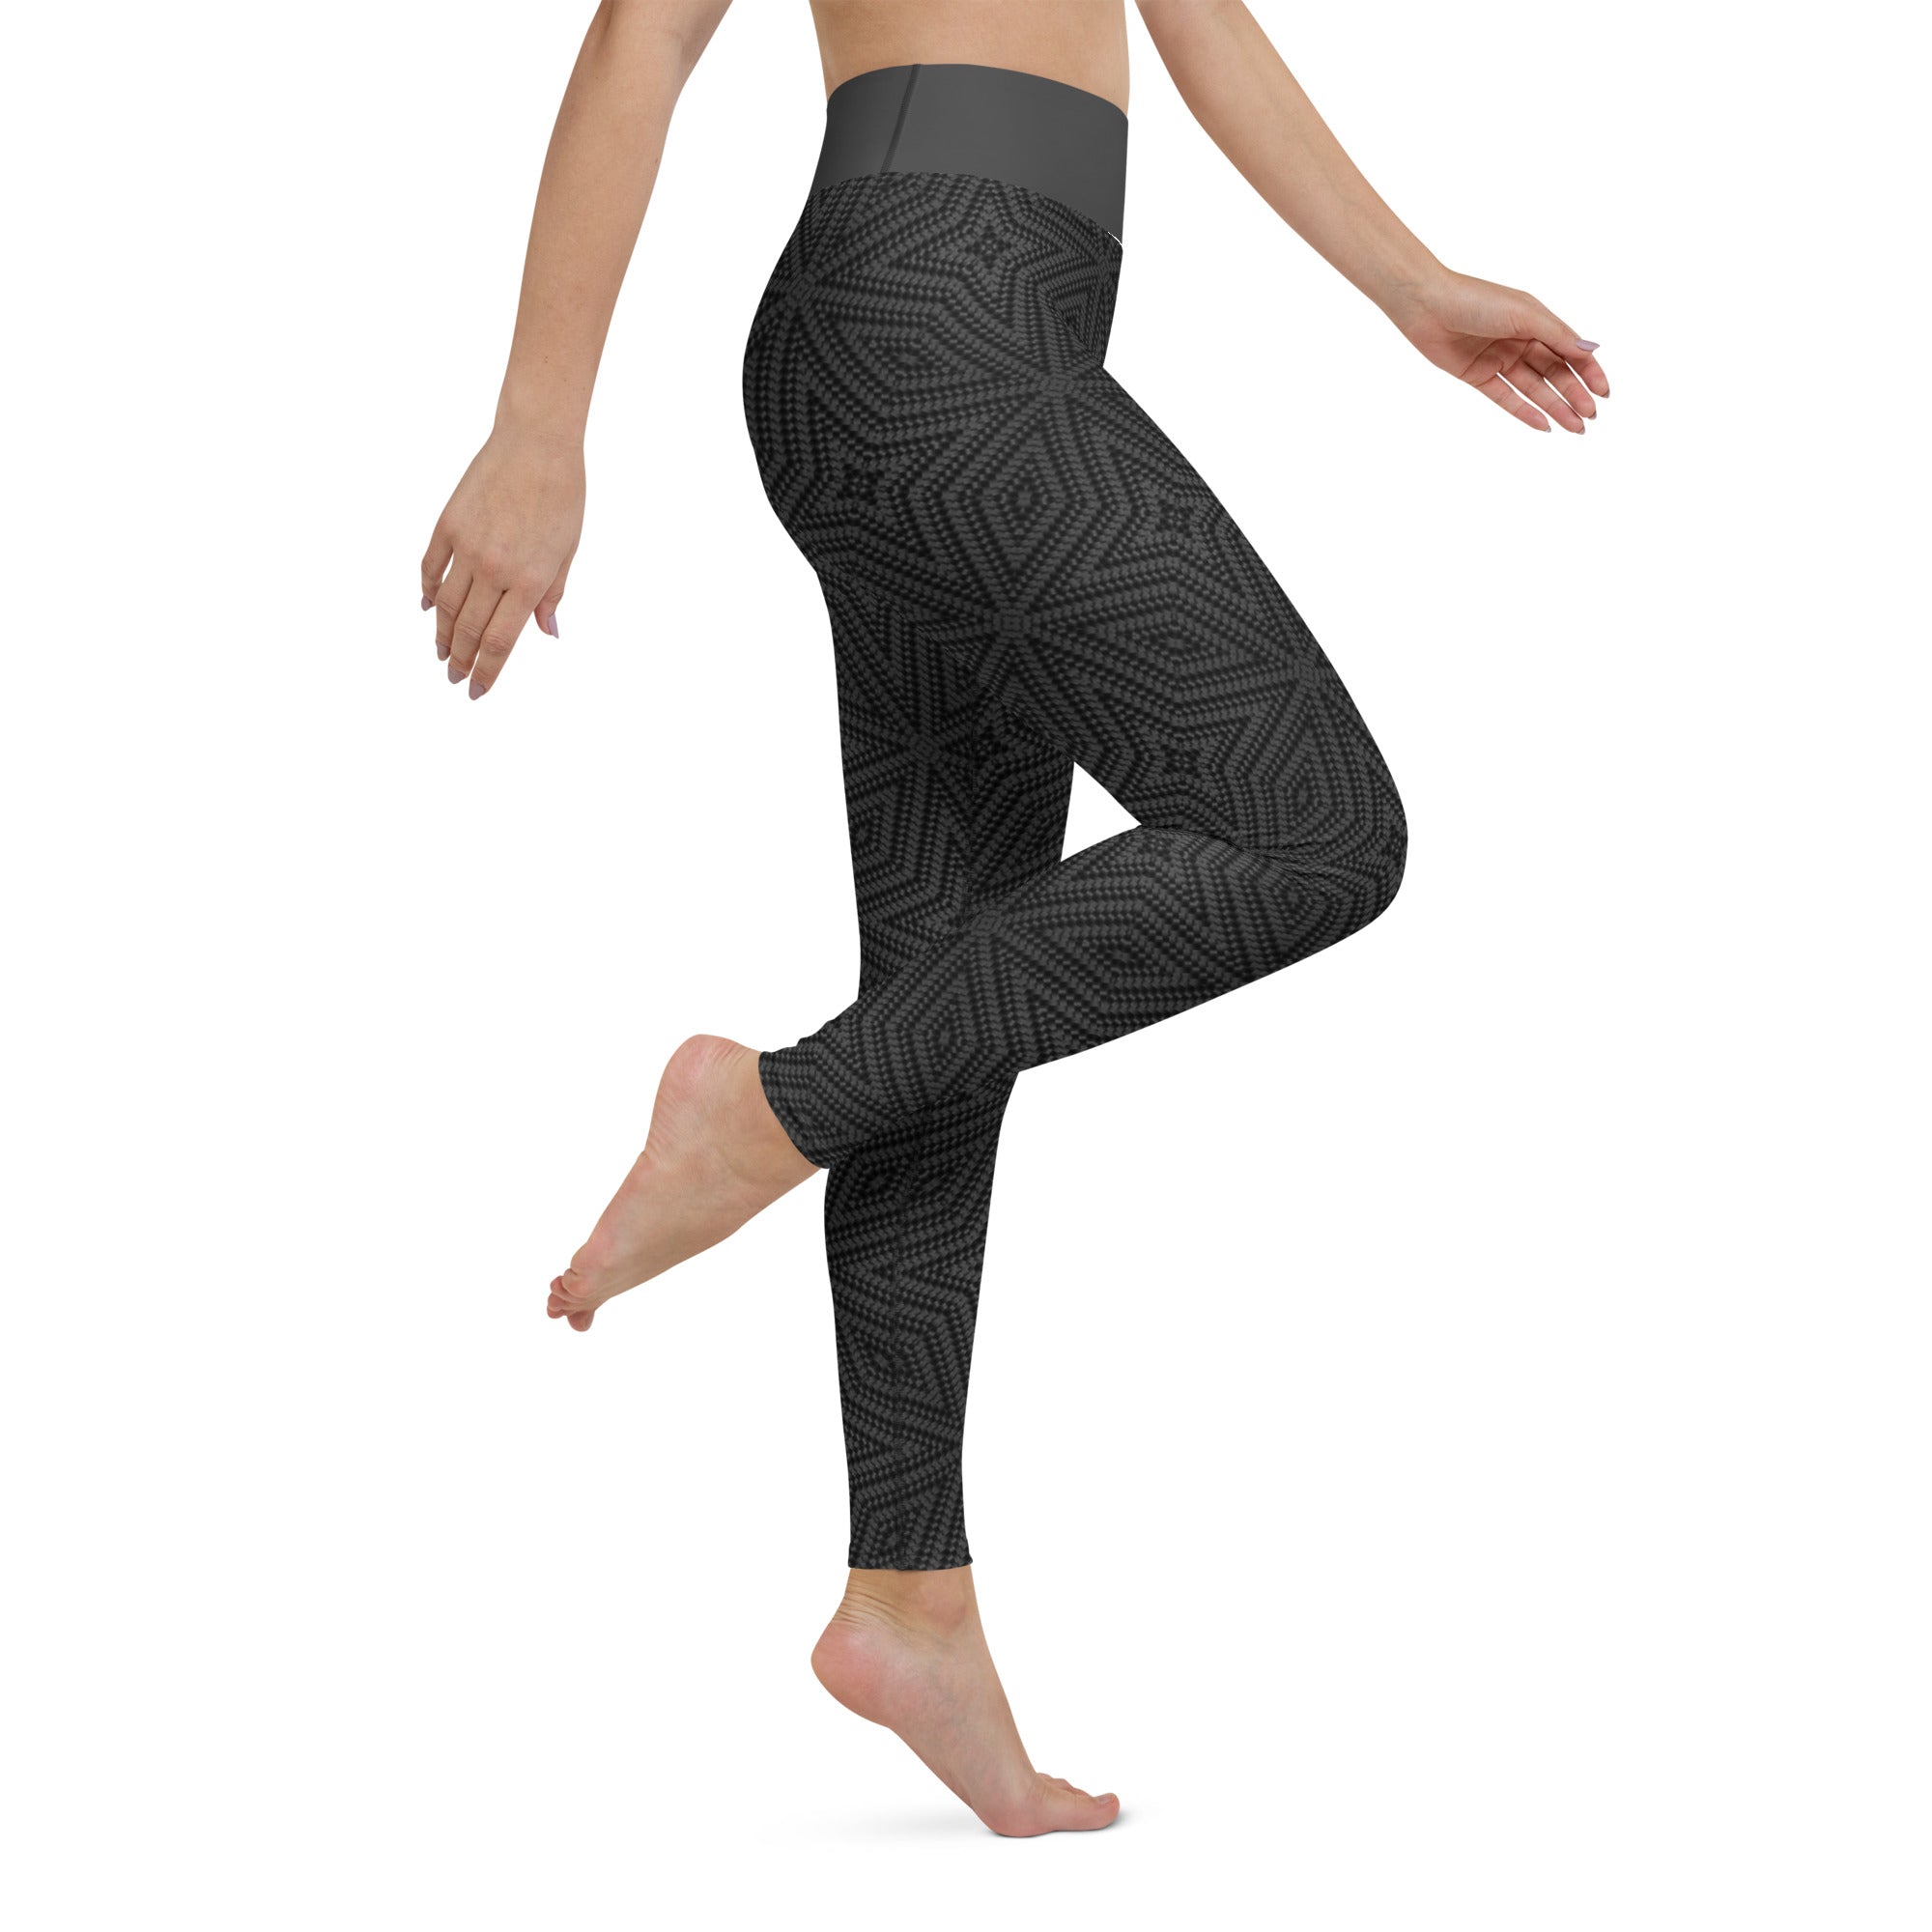 Prism Prism Yoga Leggings in various colors, perfect for any yoga wardrobe.